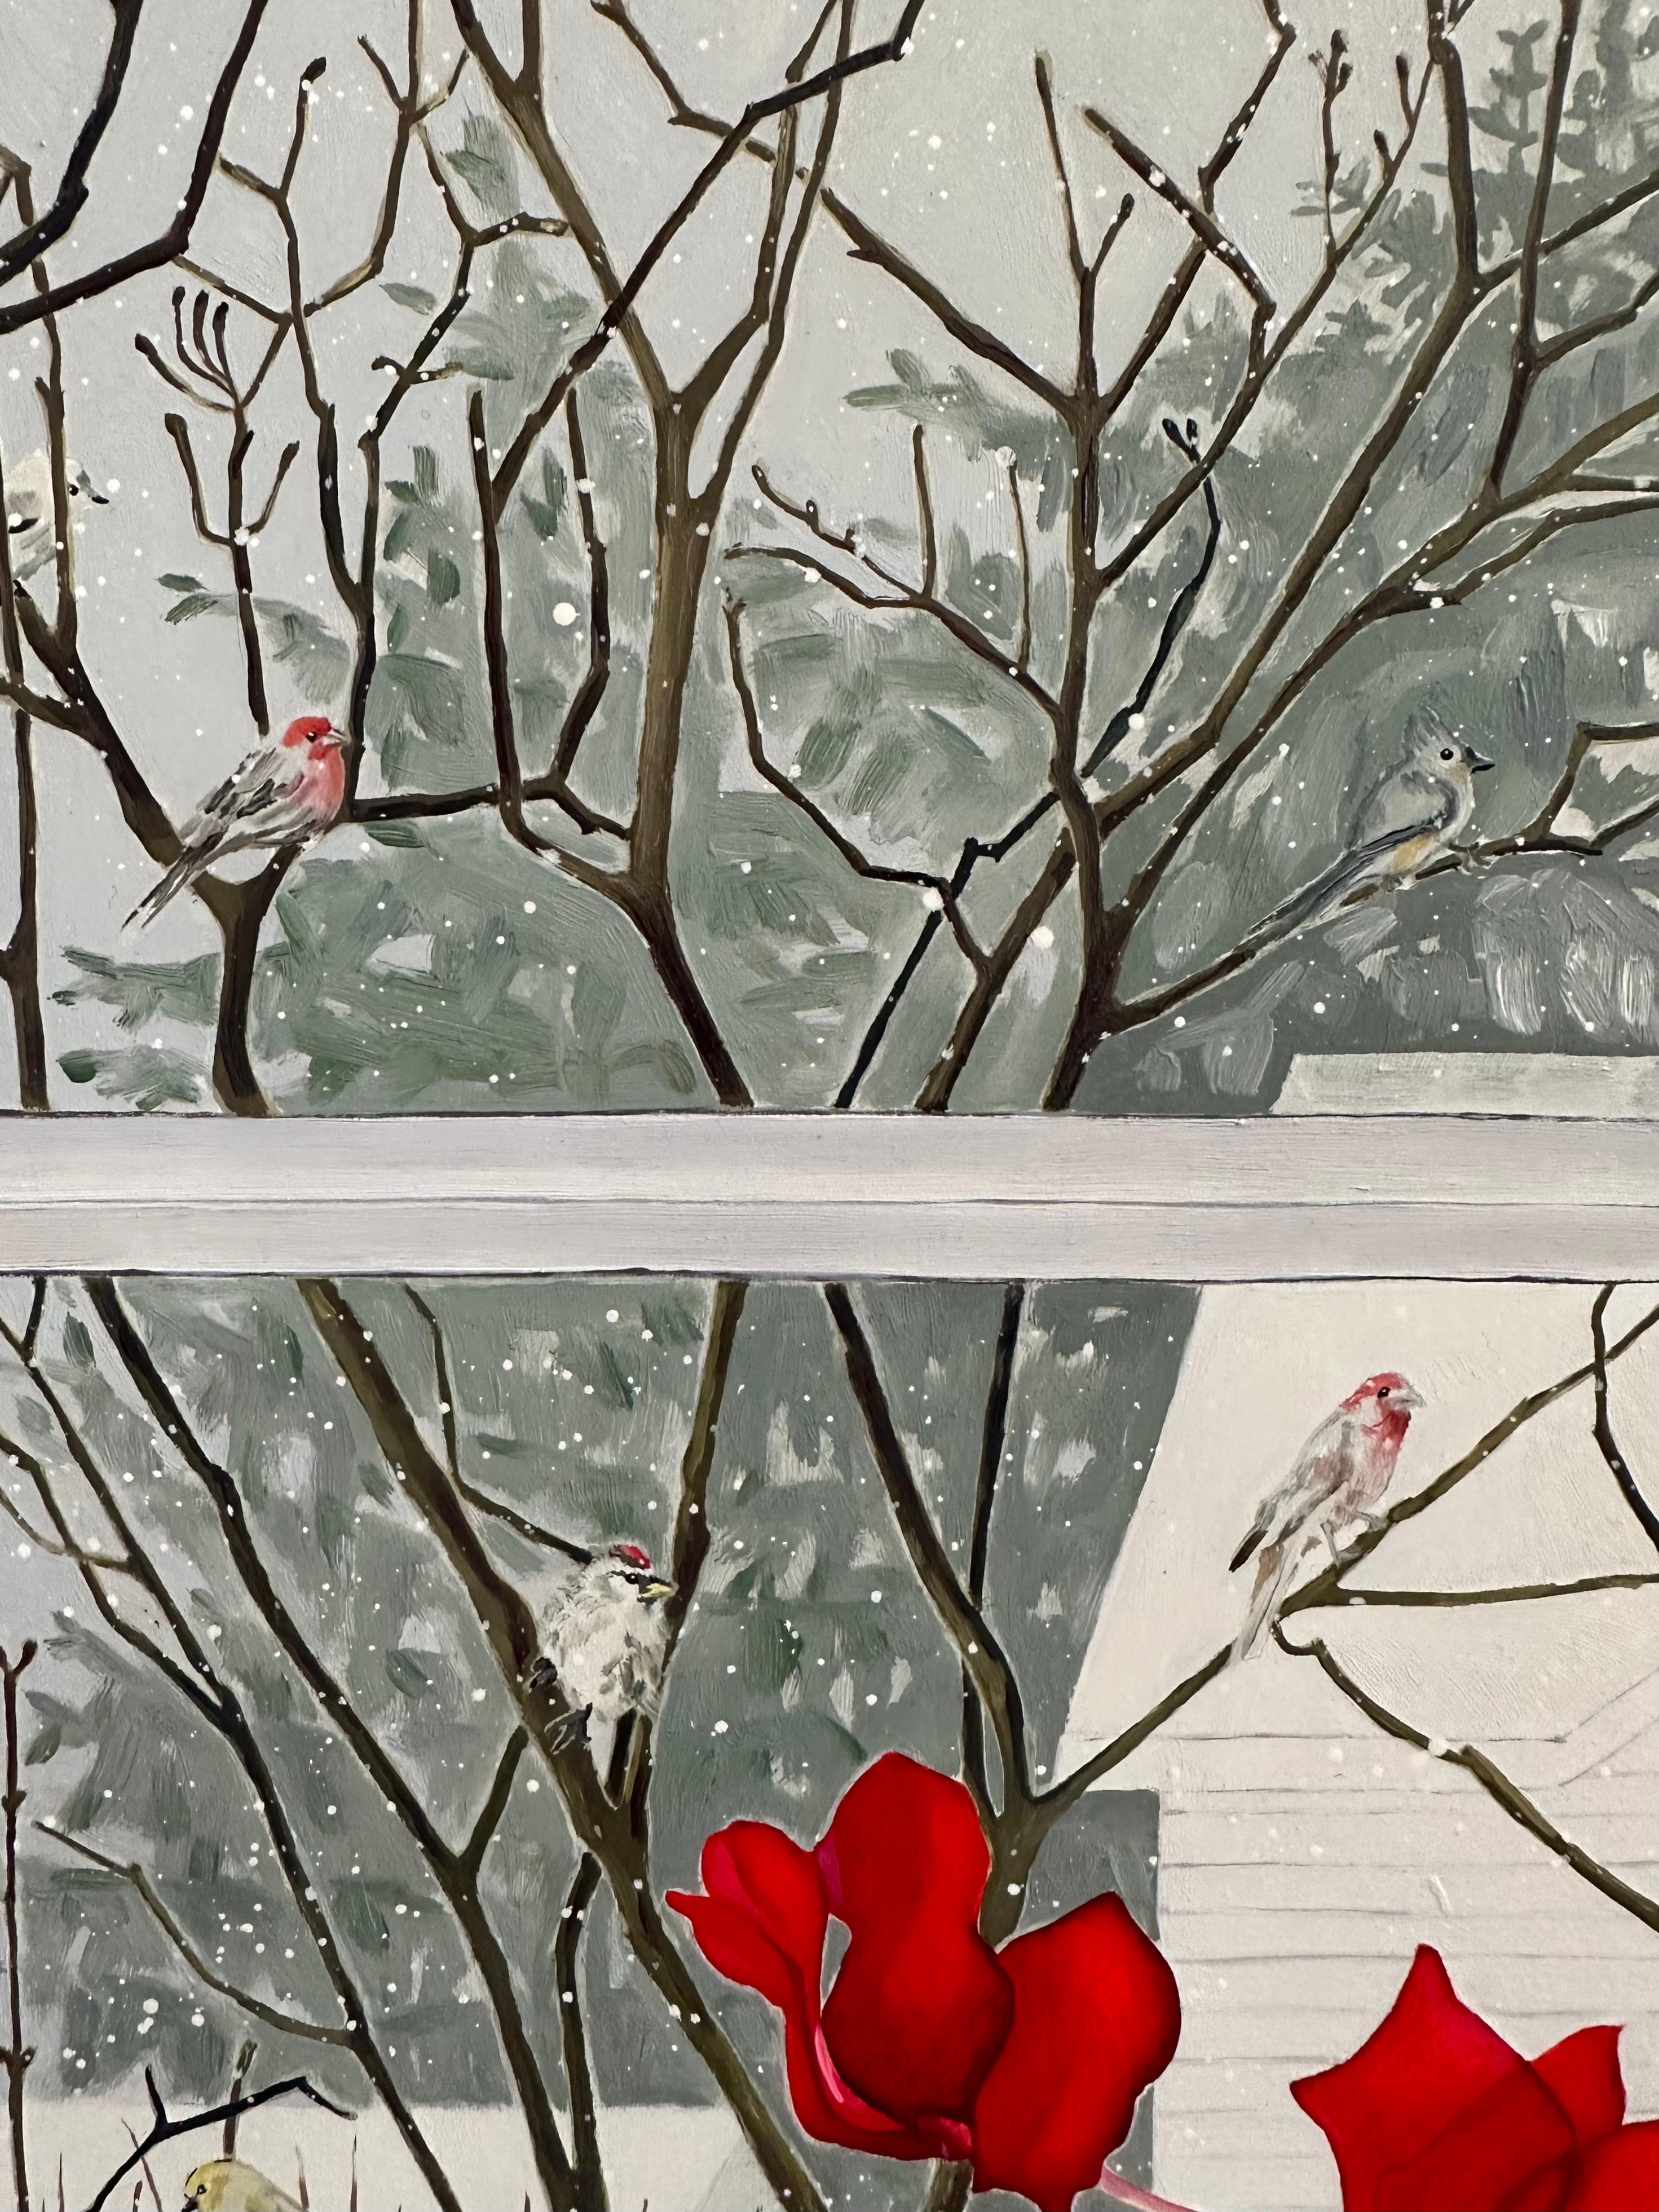 Winter Birds, Crimson Red Flowers, Green Leaves, White Snow, Winter Landscape - Contemporary Painting by Amanda Acker